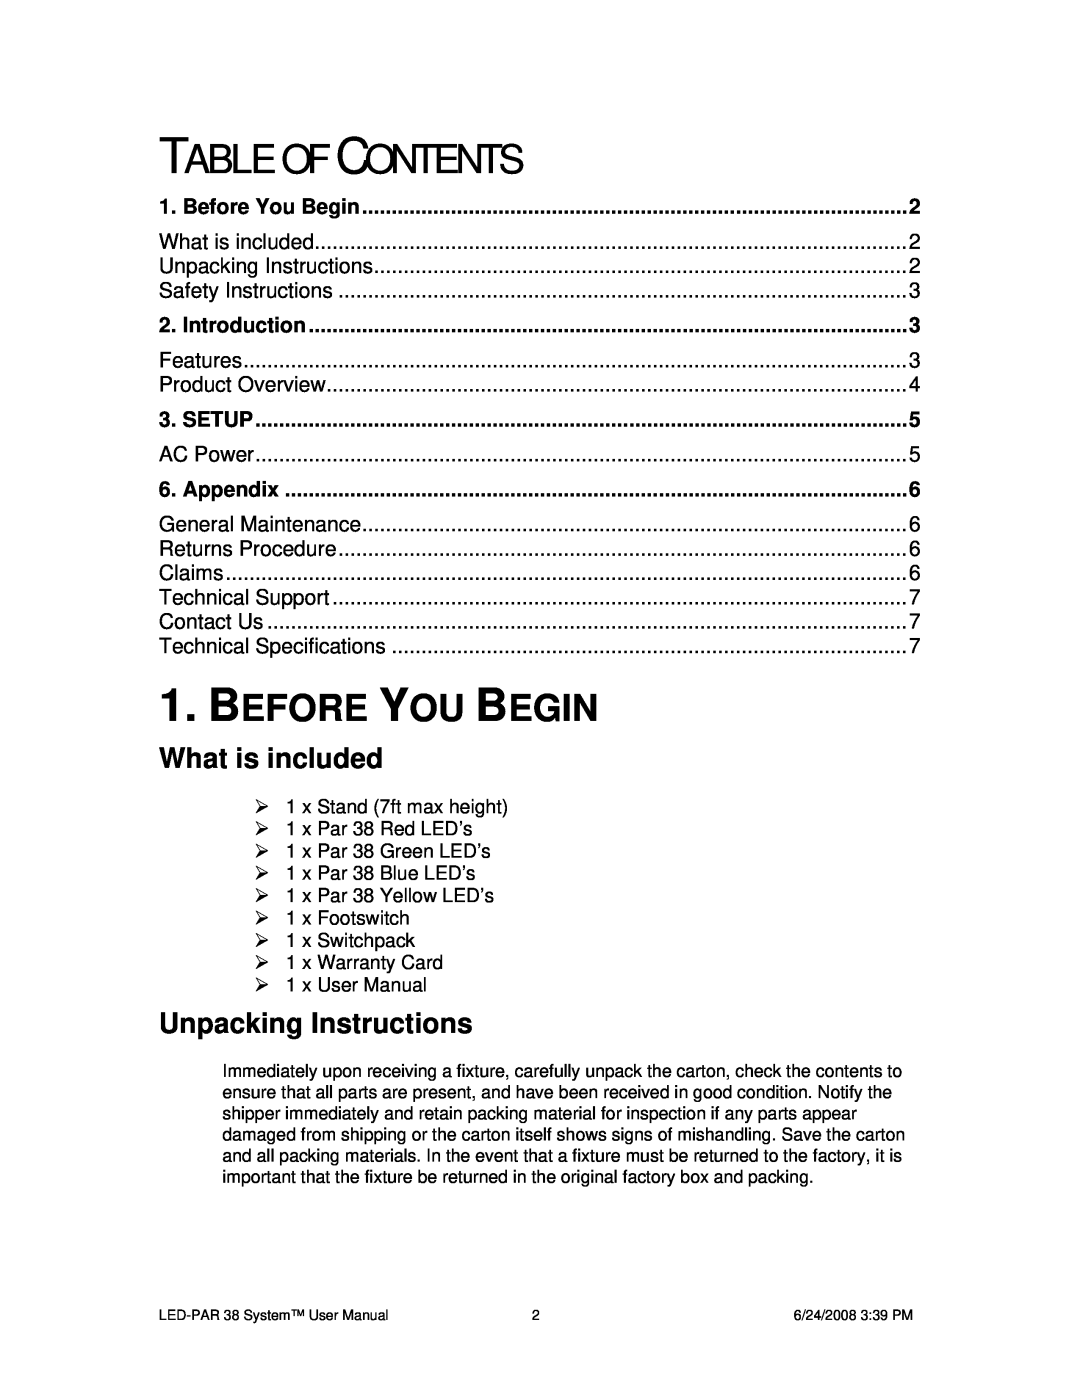 Chauvet 38 Table Of Contents, Before You Begin, What is included, Unpacking Instructions, Introduction, Setup, Appendix 